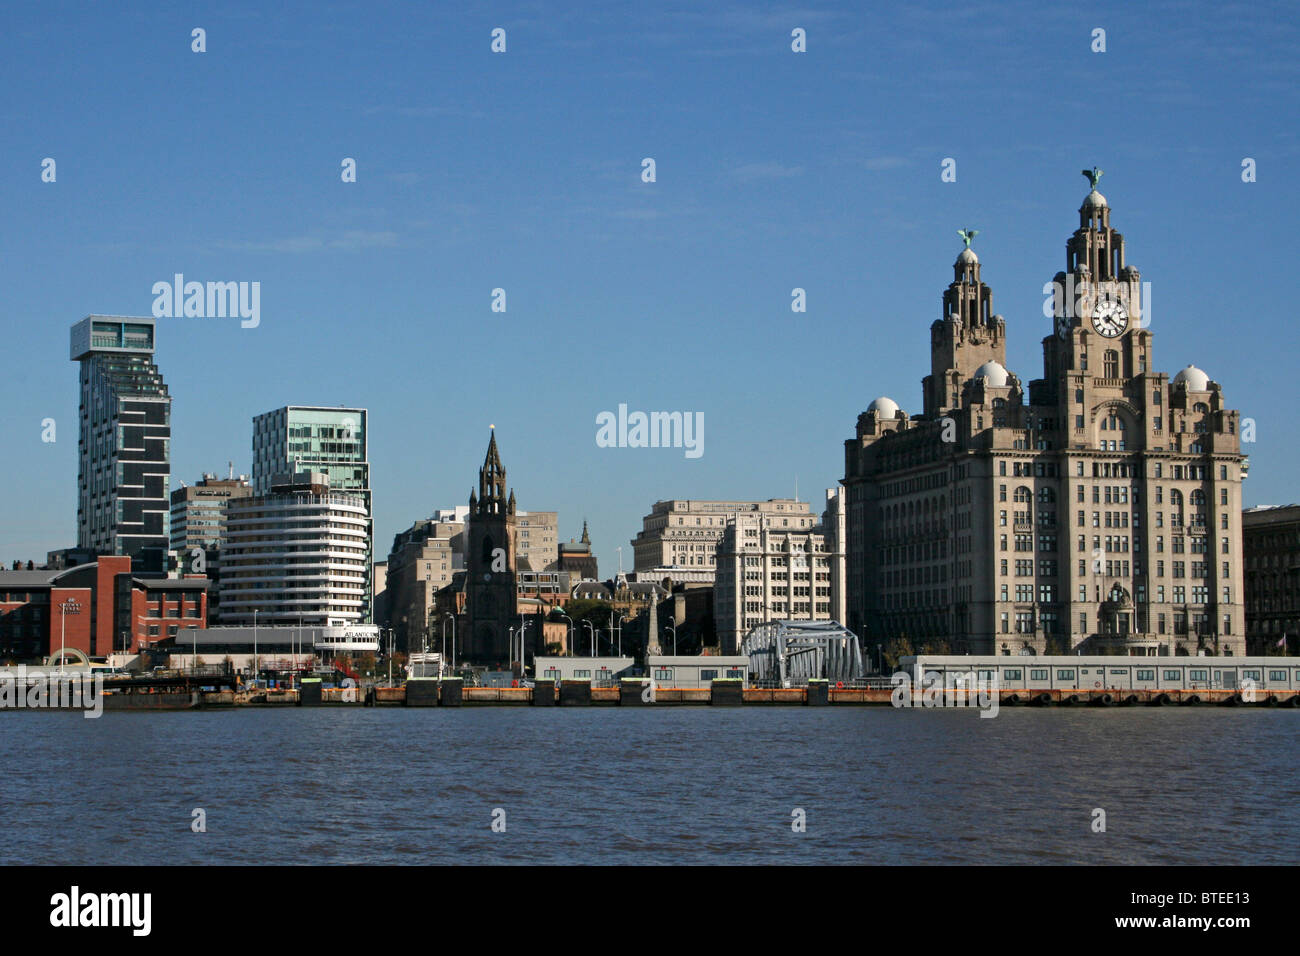 Liverpool Skyline As Seen From The River Mersey, UK Stock Photo